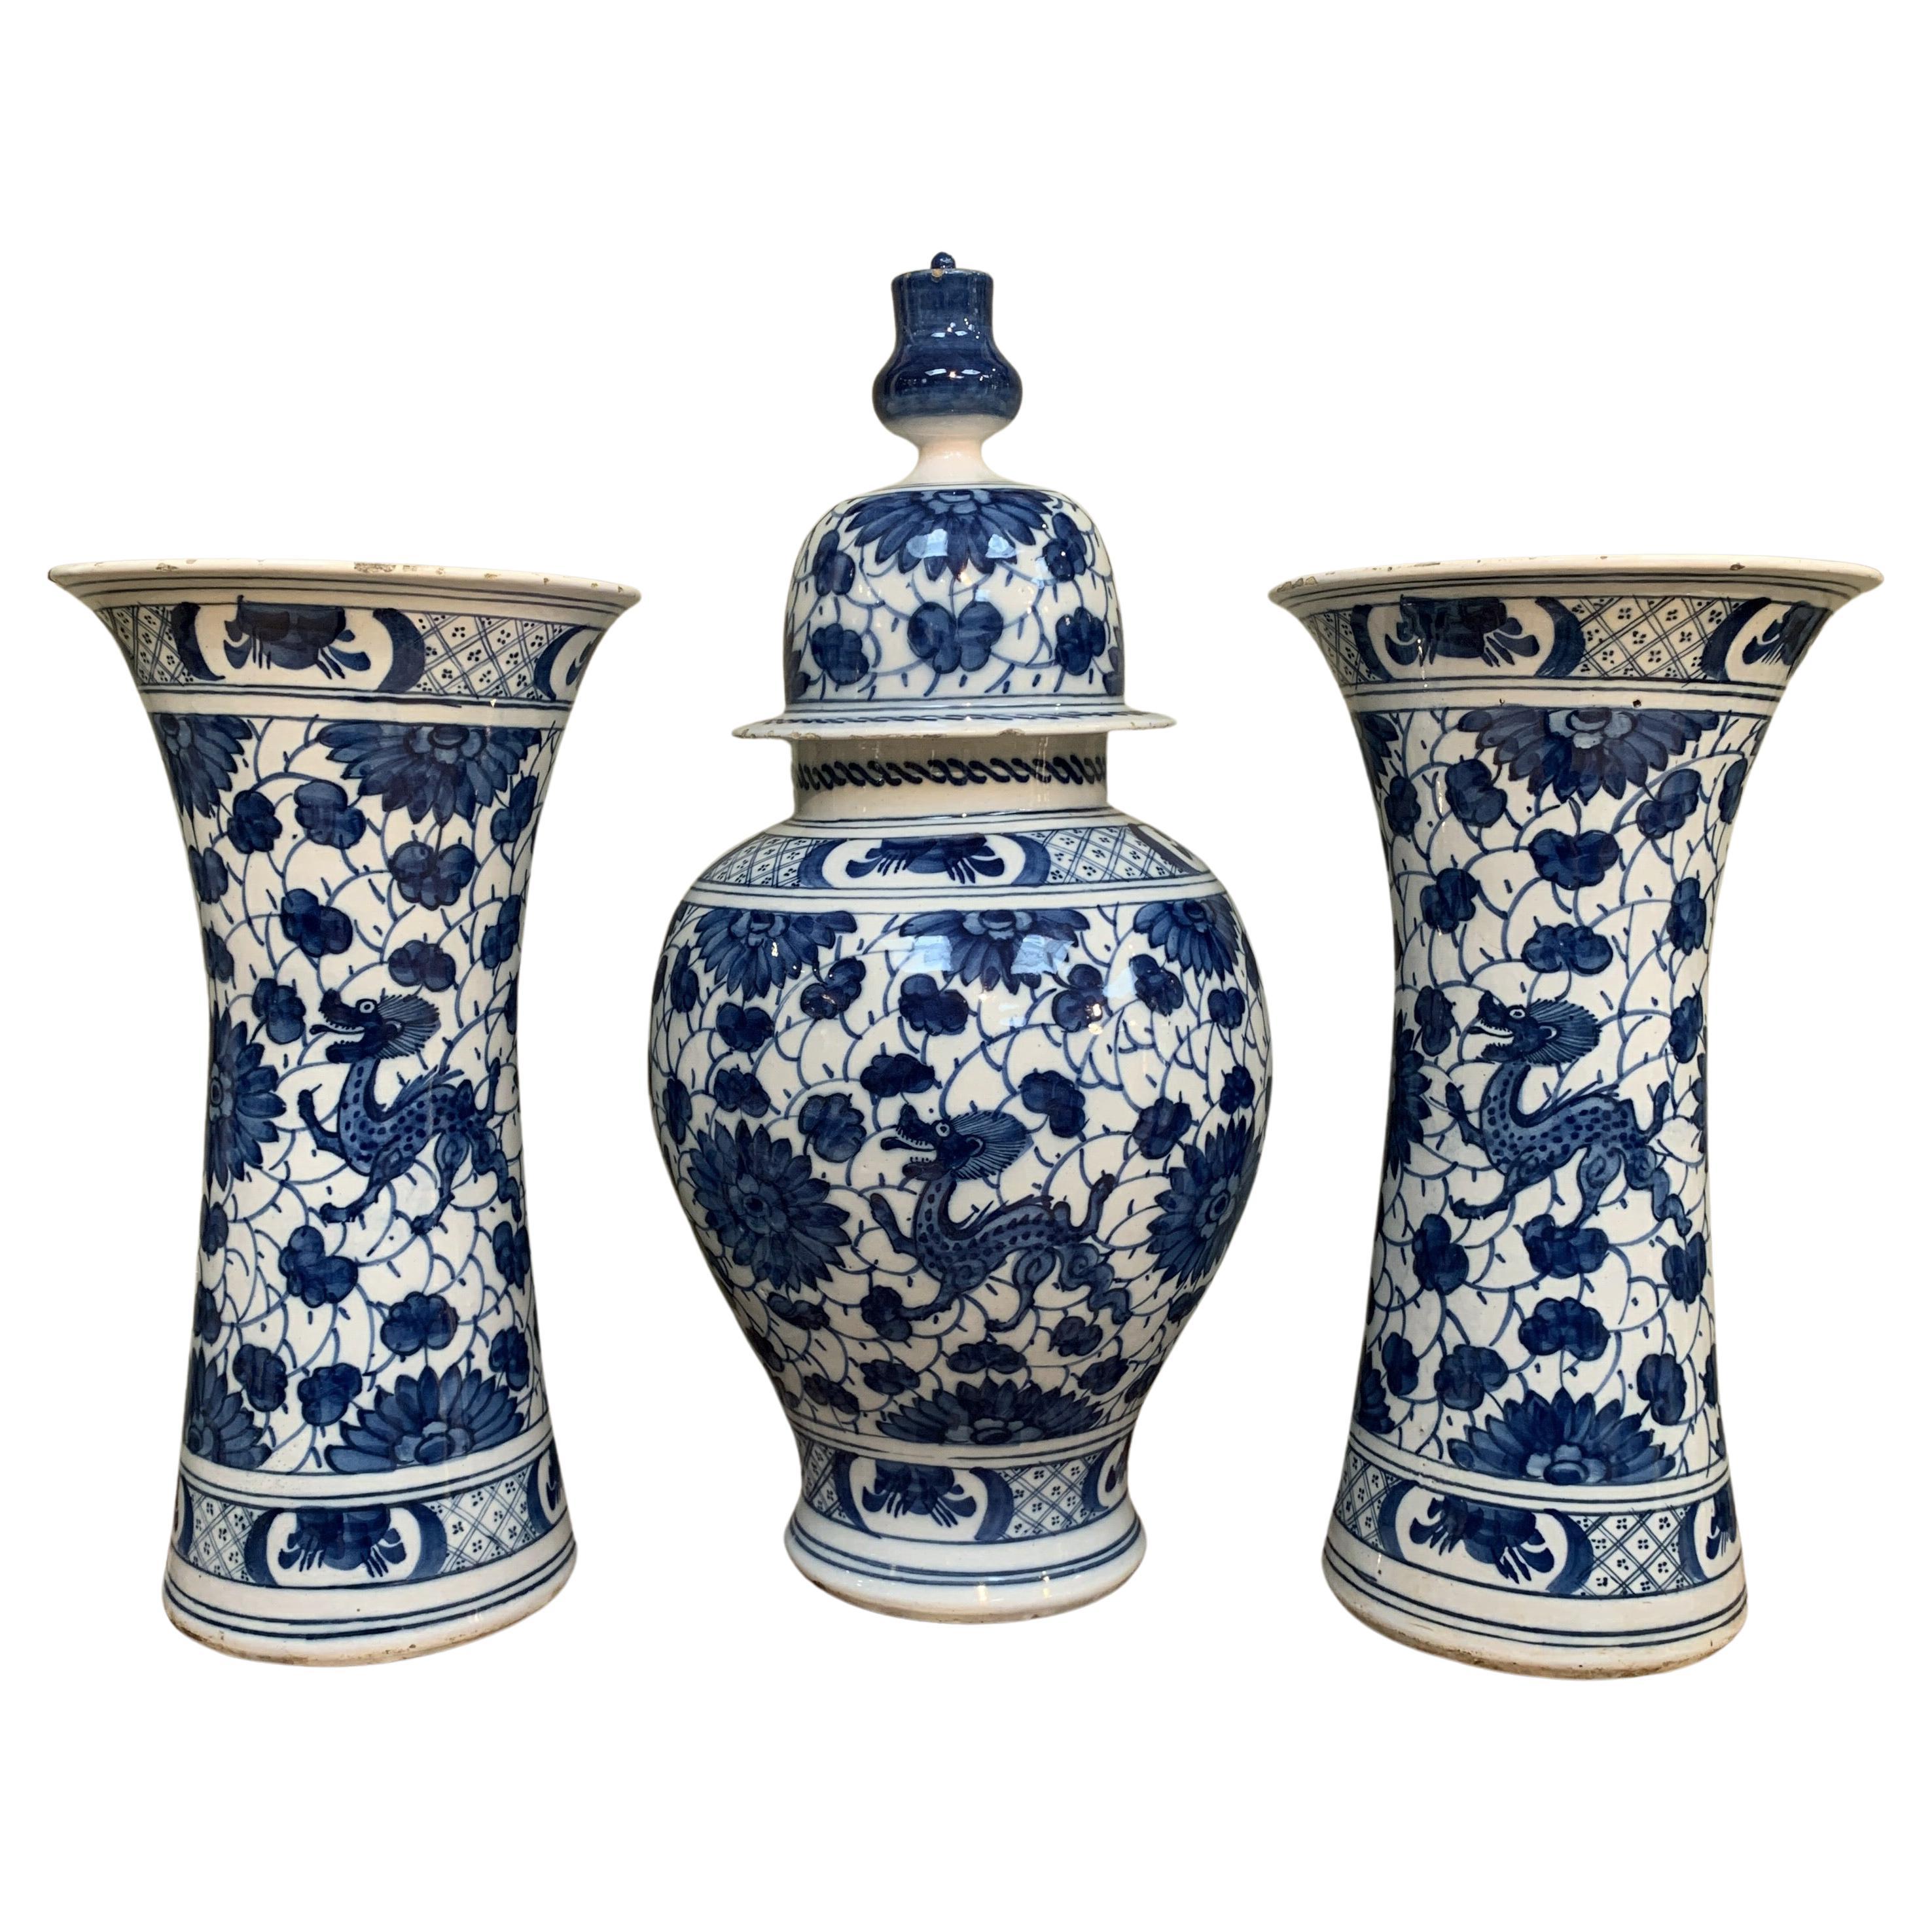 Rare and Large Dutch Delft Dragons Three Piece Garniture Vases Set, Early 18th C